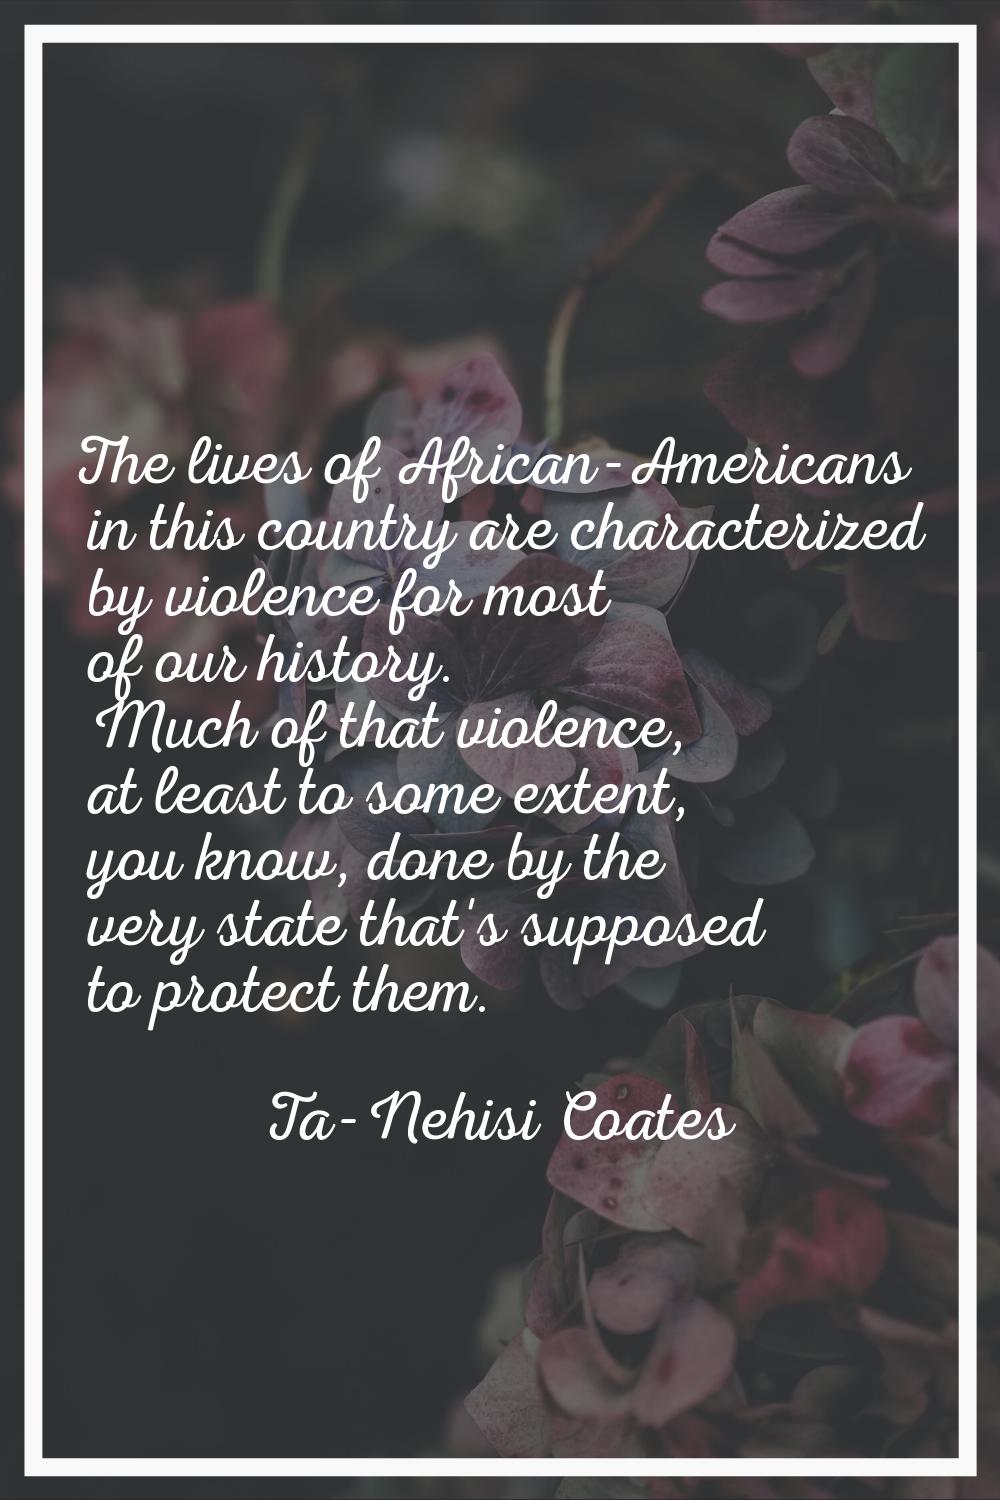 The lives of African-Americans in this country are characterized by violence for most of our histor